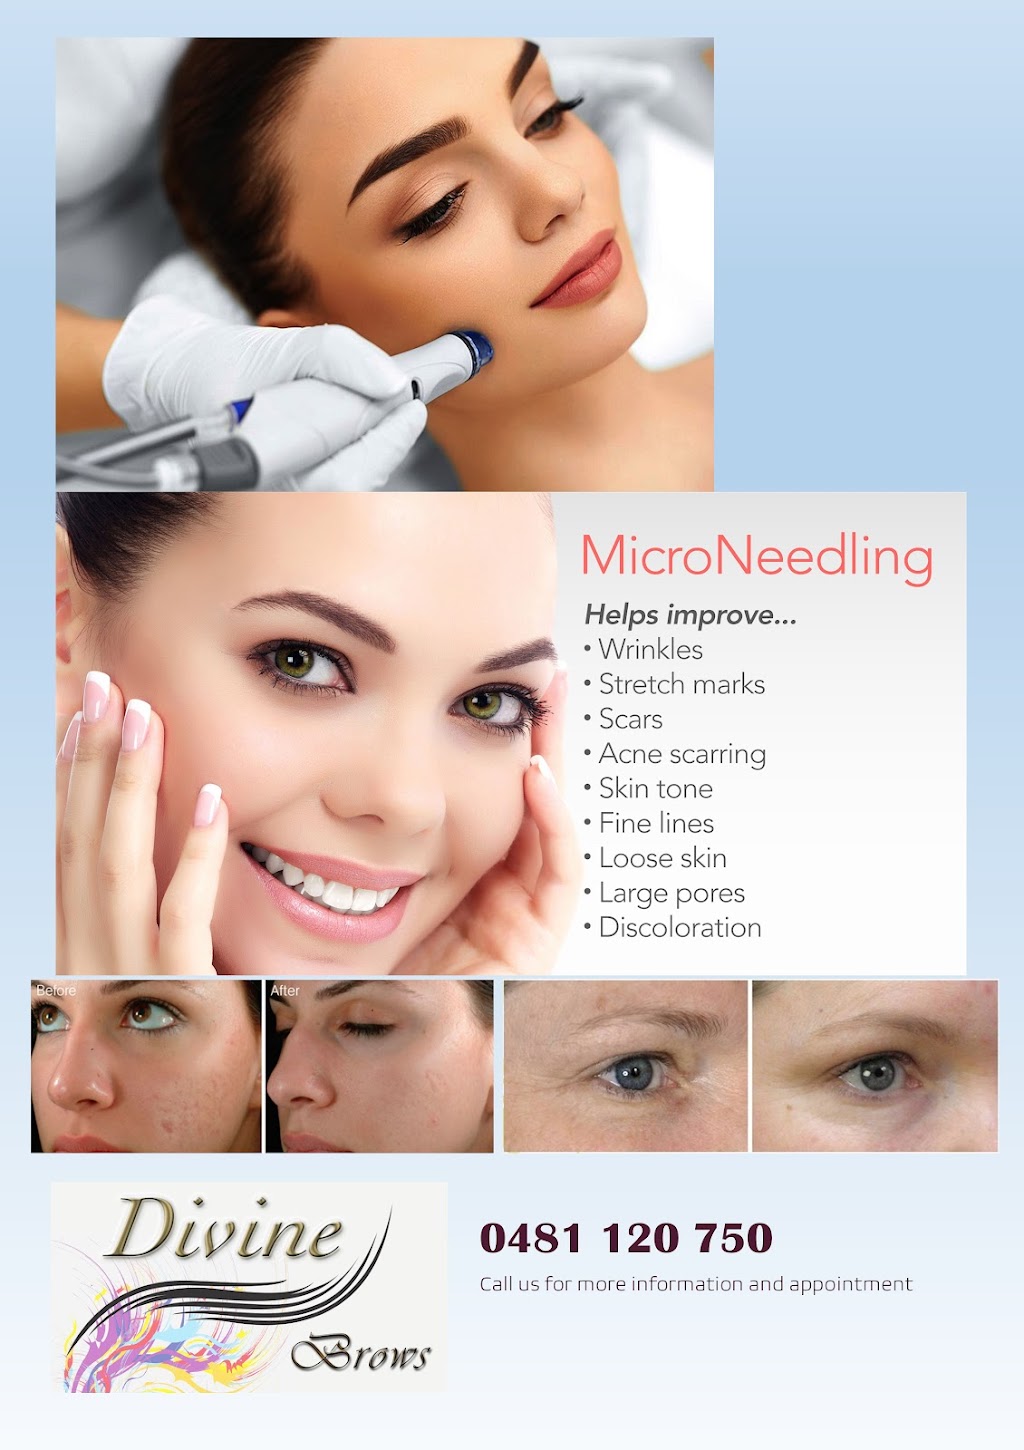 Divine Brows and Cosmetics |  | 4 Stirling Cres, Glen Waverley VIC 3150, Australia | 0481120750 OR +61 481 120 750